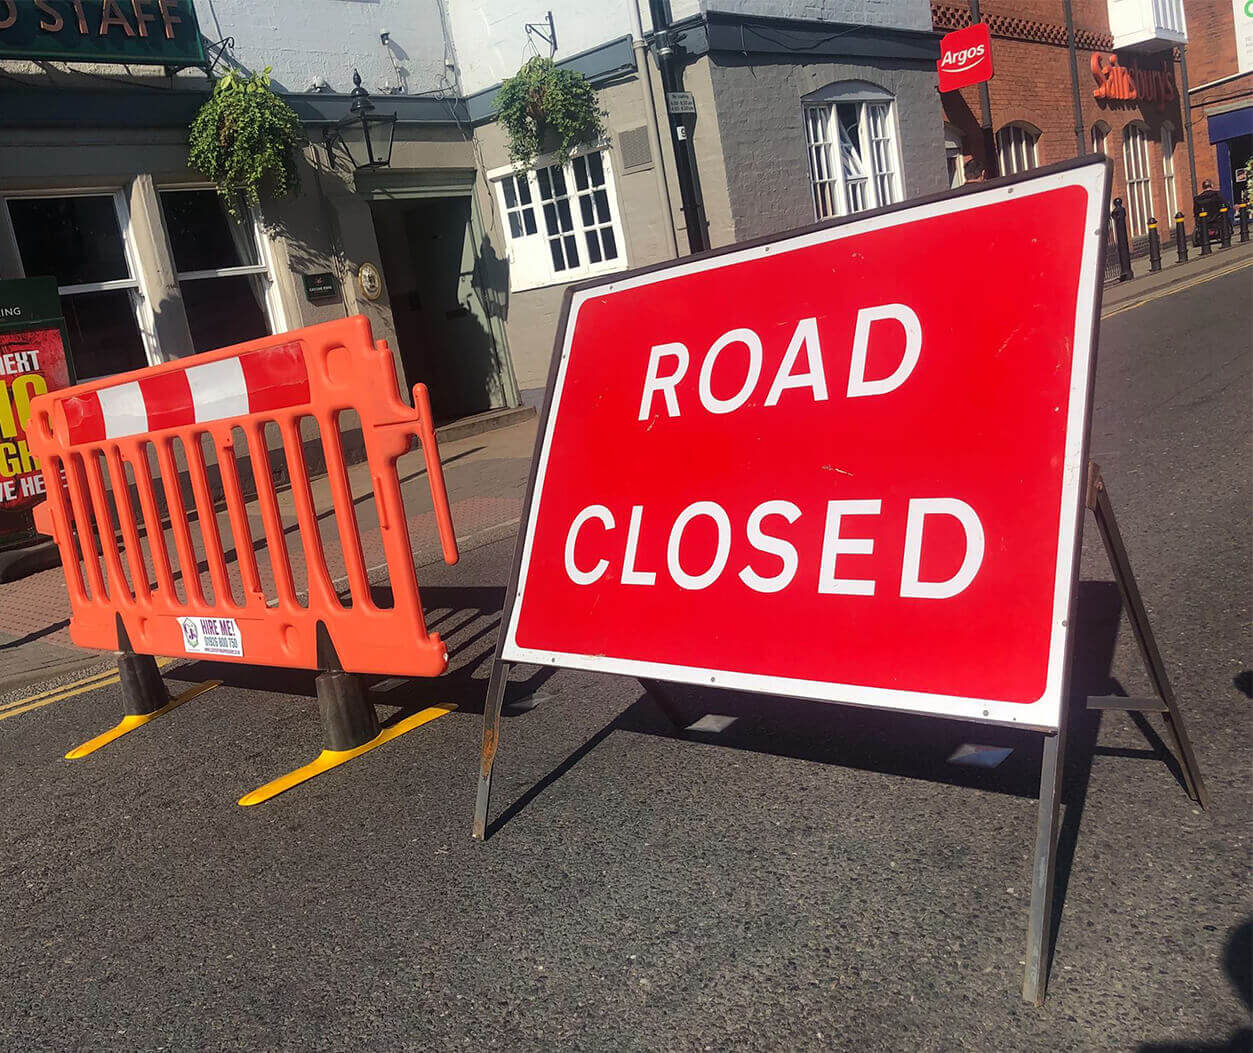 Road closed sign at an event